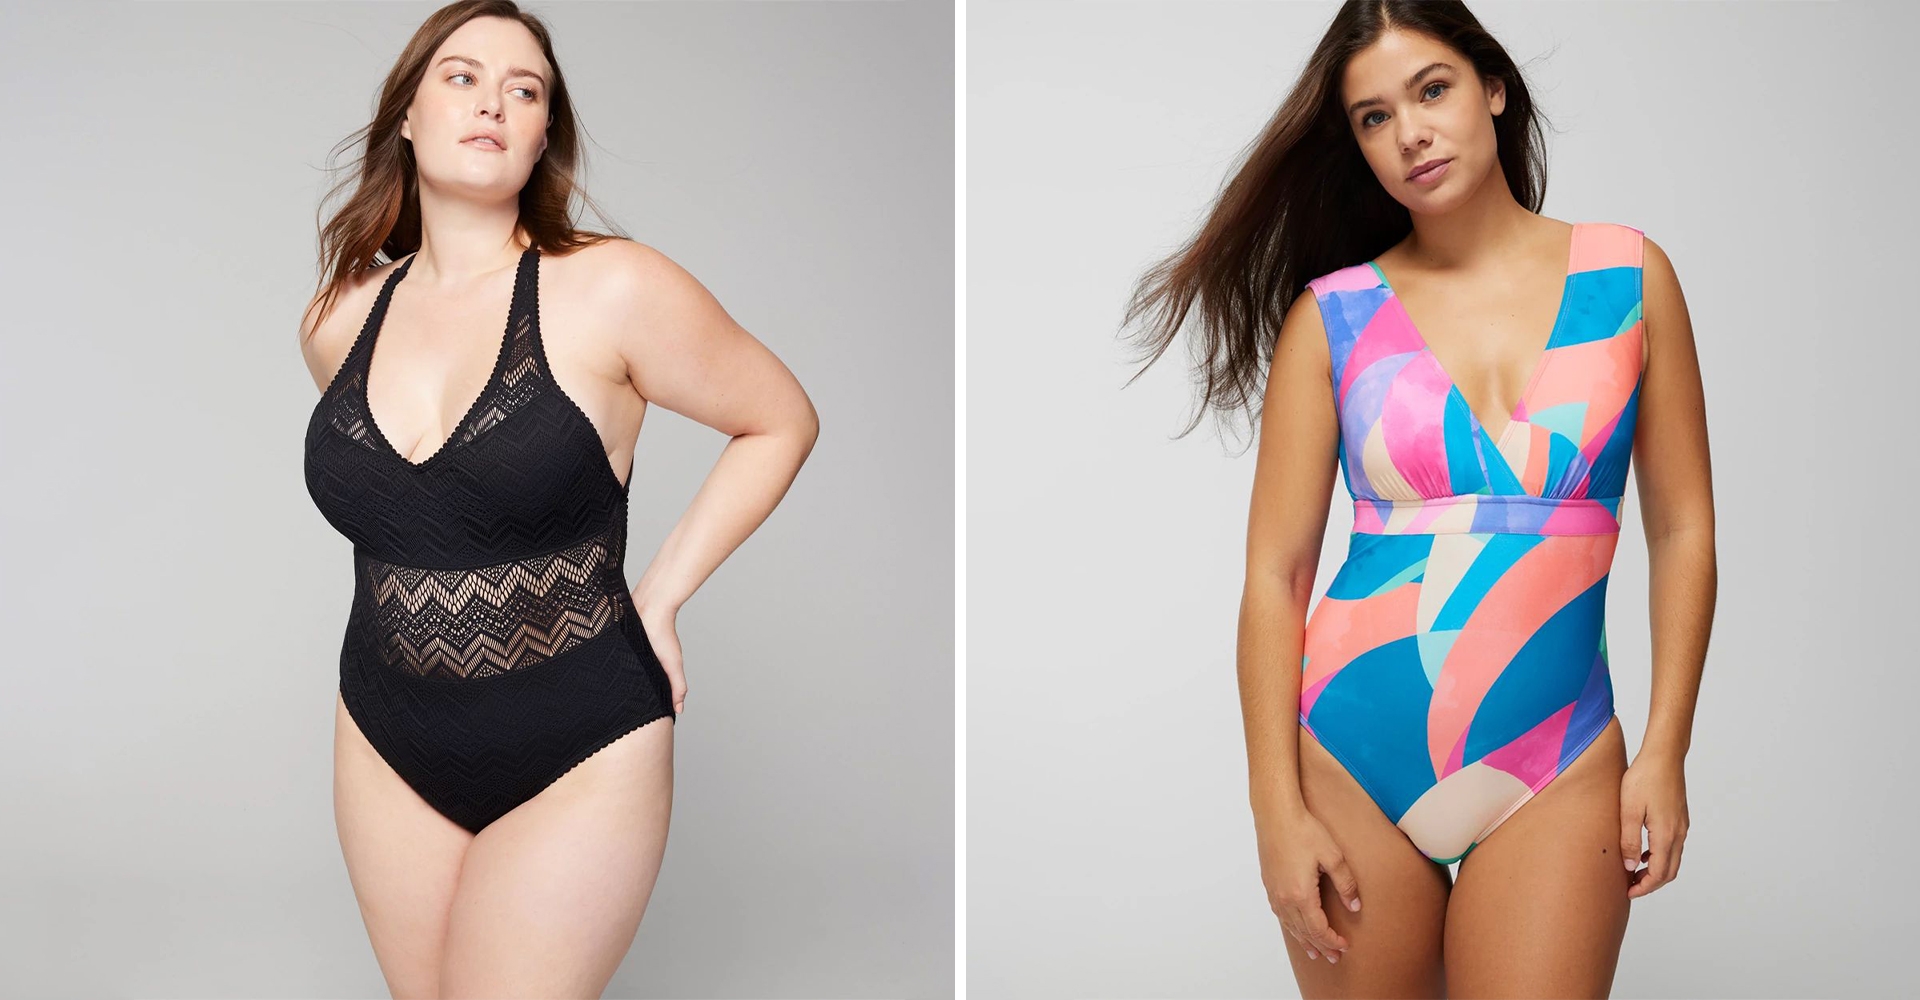 Soma<sup class=st-superscript>®</sup> model wearing black crochet one-piece swimsuit. Soma<sup class=st-superscript>®</sup> model wearing blue and pink geometric print one-piece swimsuit.